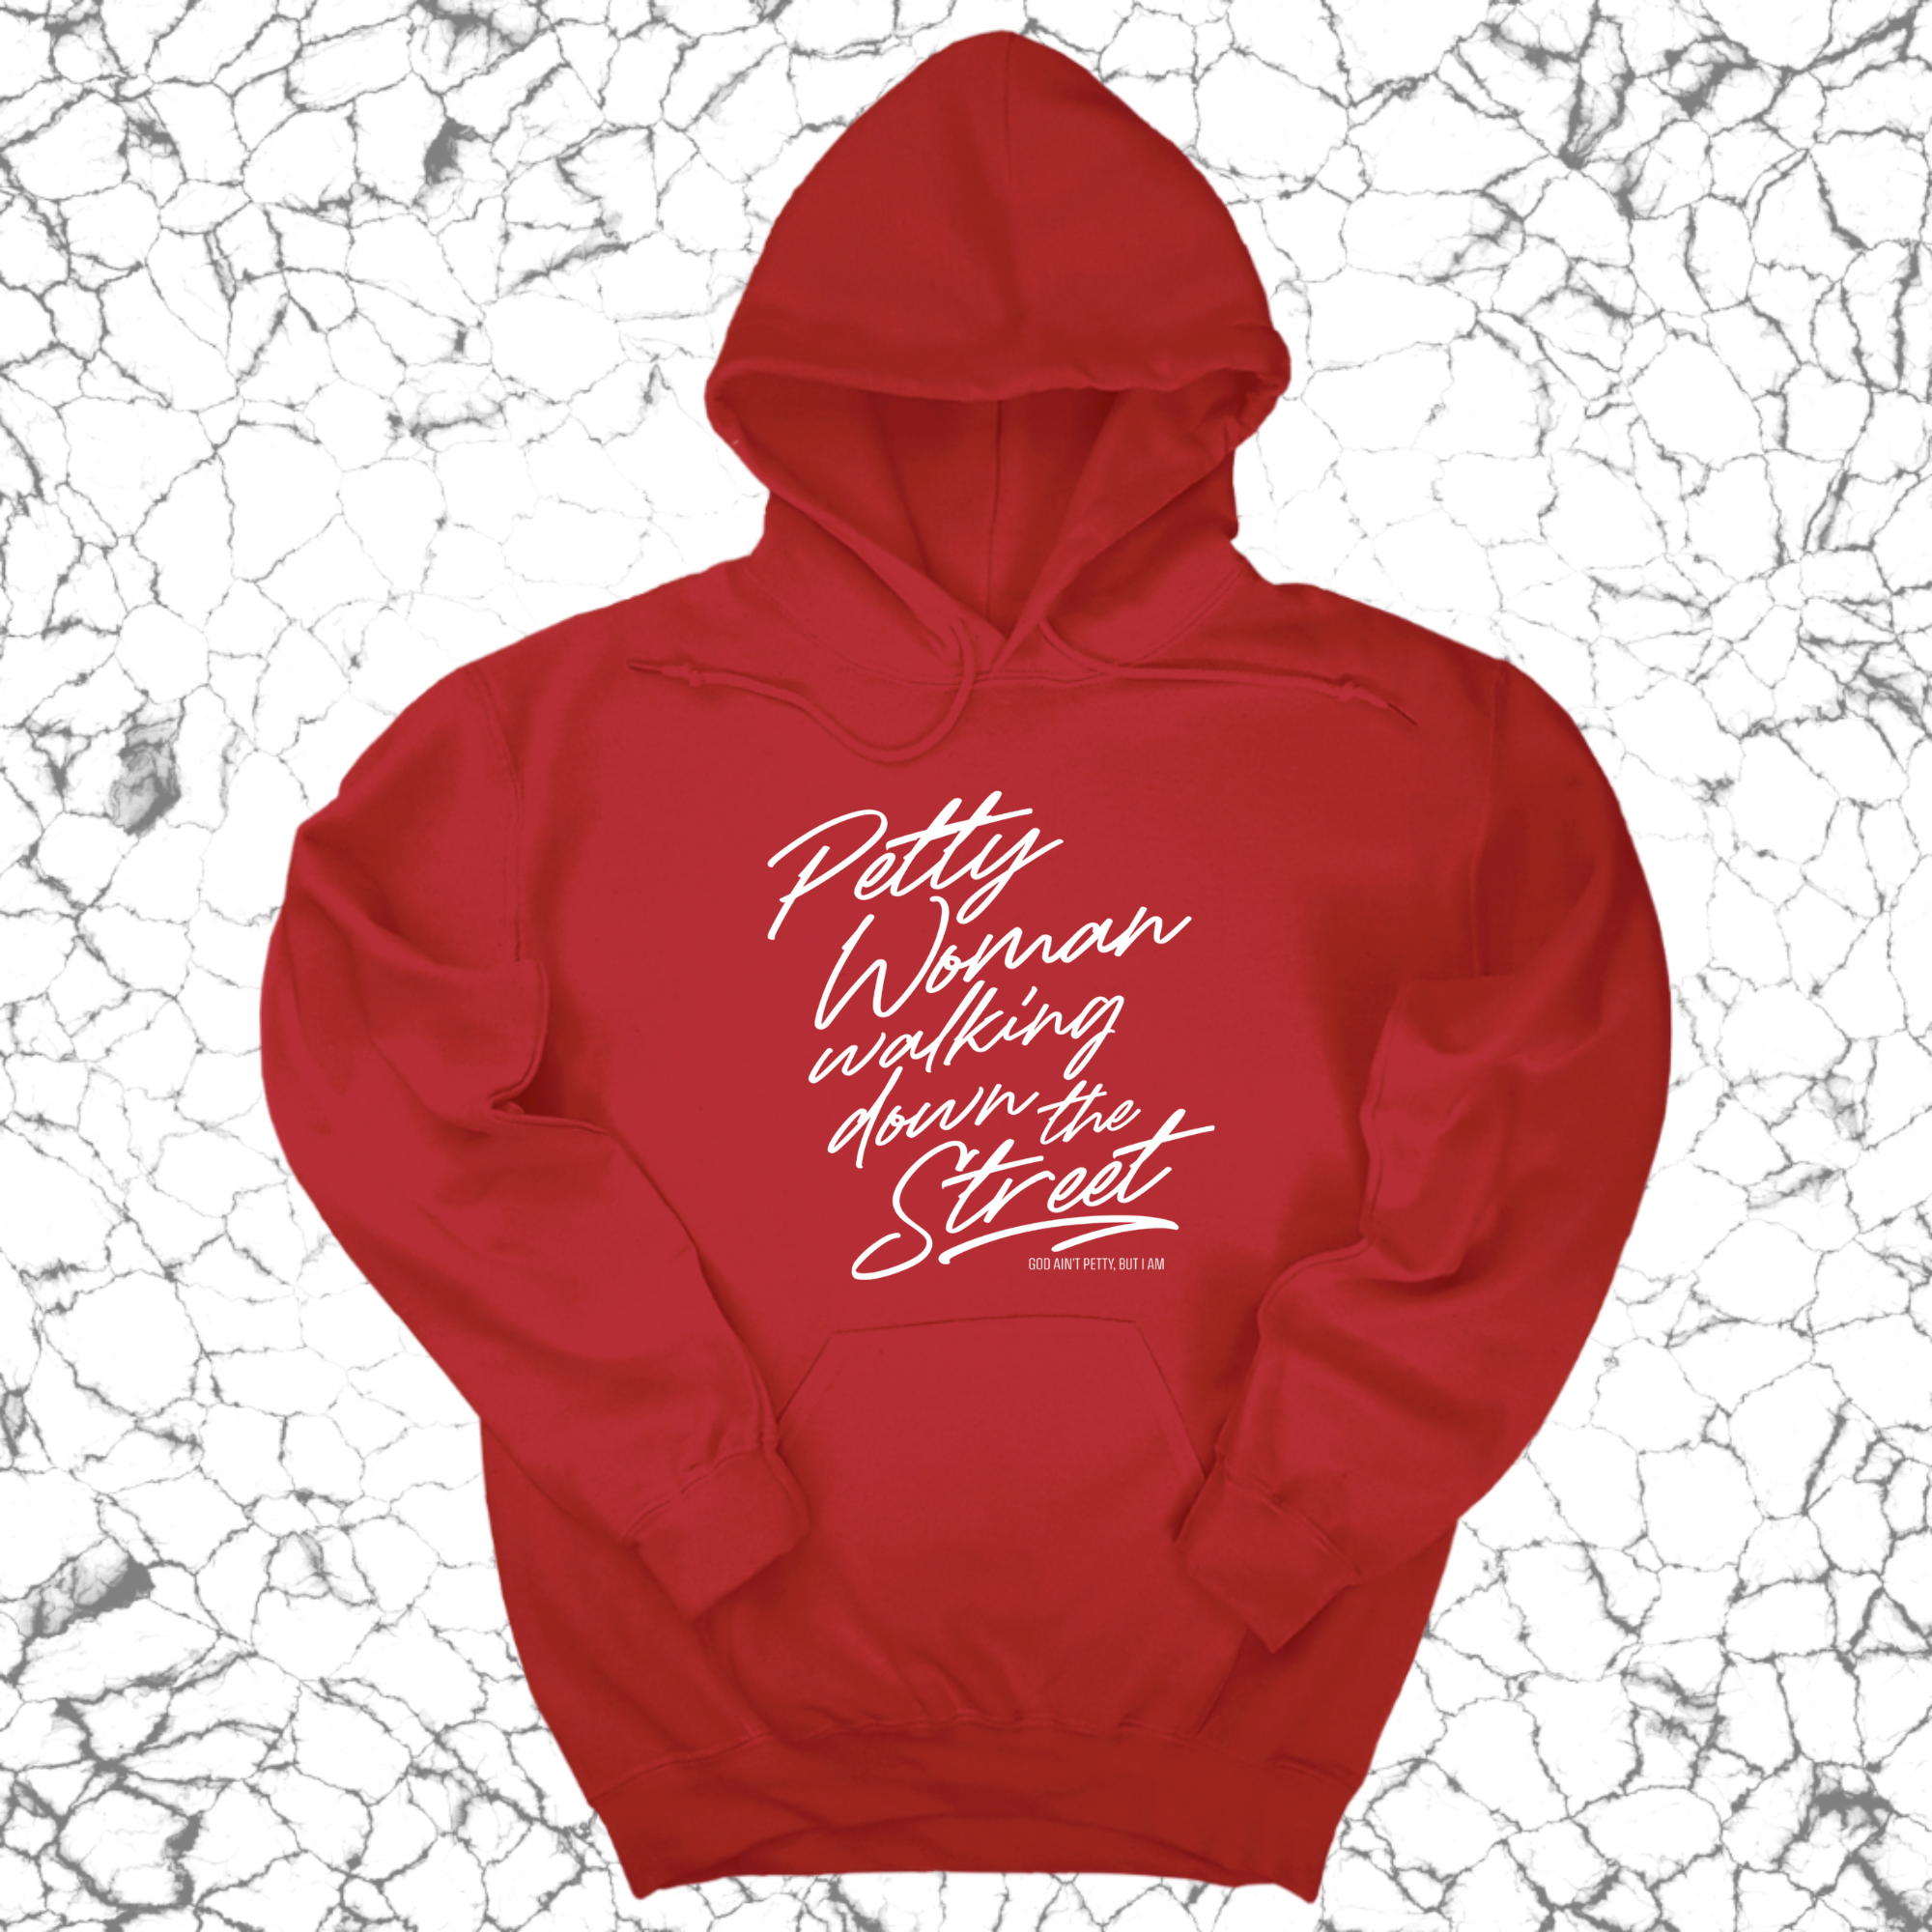 Petty Woman Walking Down The Street Unsisex Hoodie-Hoodie-The Original God Ain't Petty But I Am